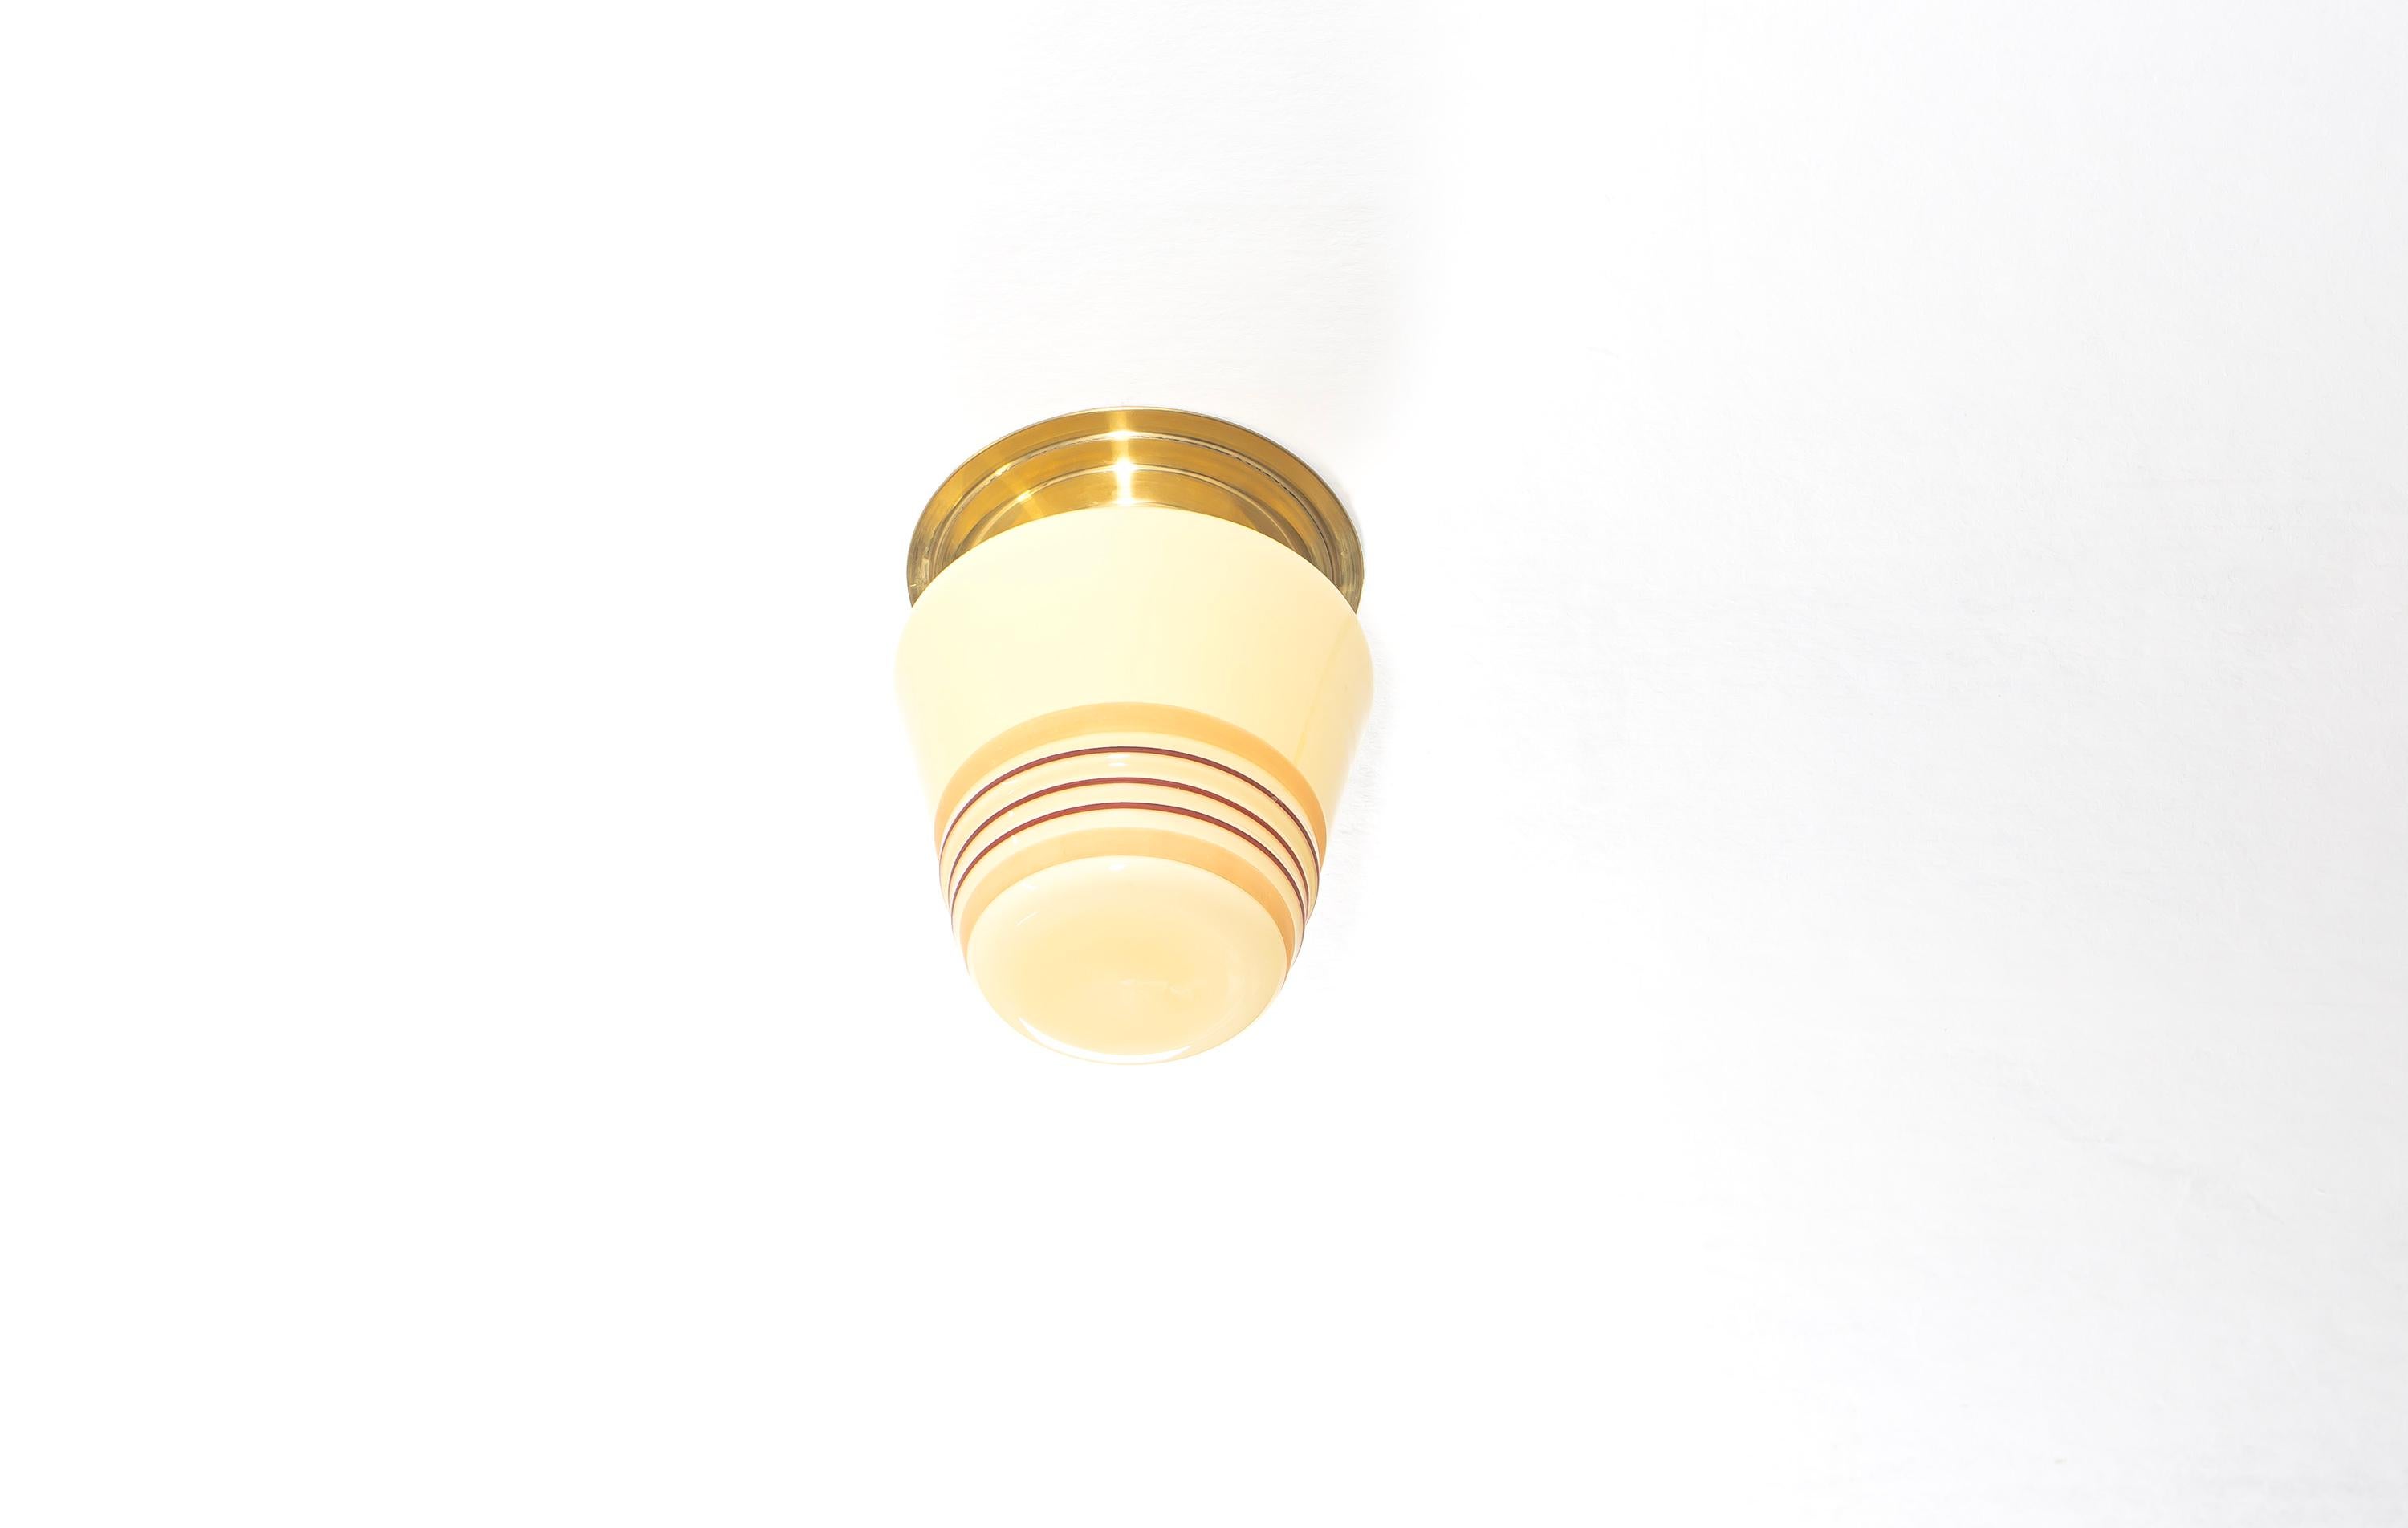 Sculptural ceiling light with hand-decorated shade and brass metal base. Designed and made in Norway from circa 1950s first half. The lamp is fully working and in good vintage condition. It is fitted with one E27 bulb holder (works in the US) and